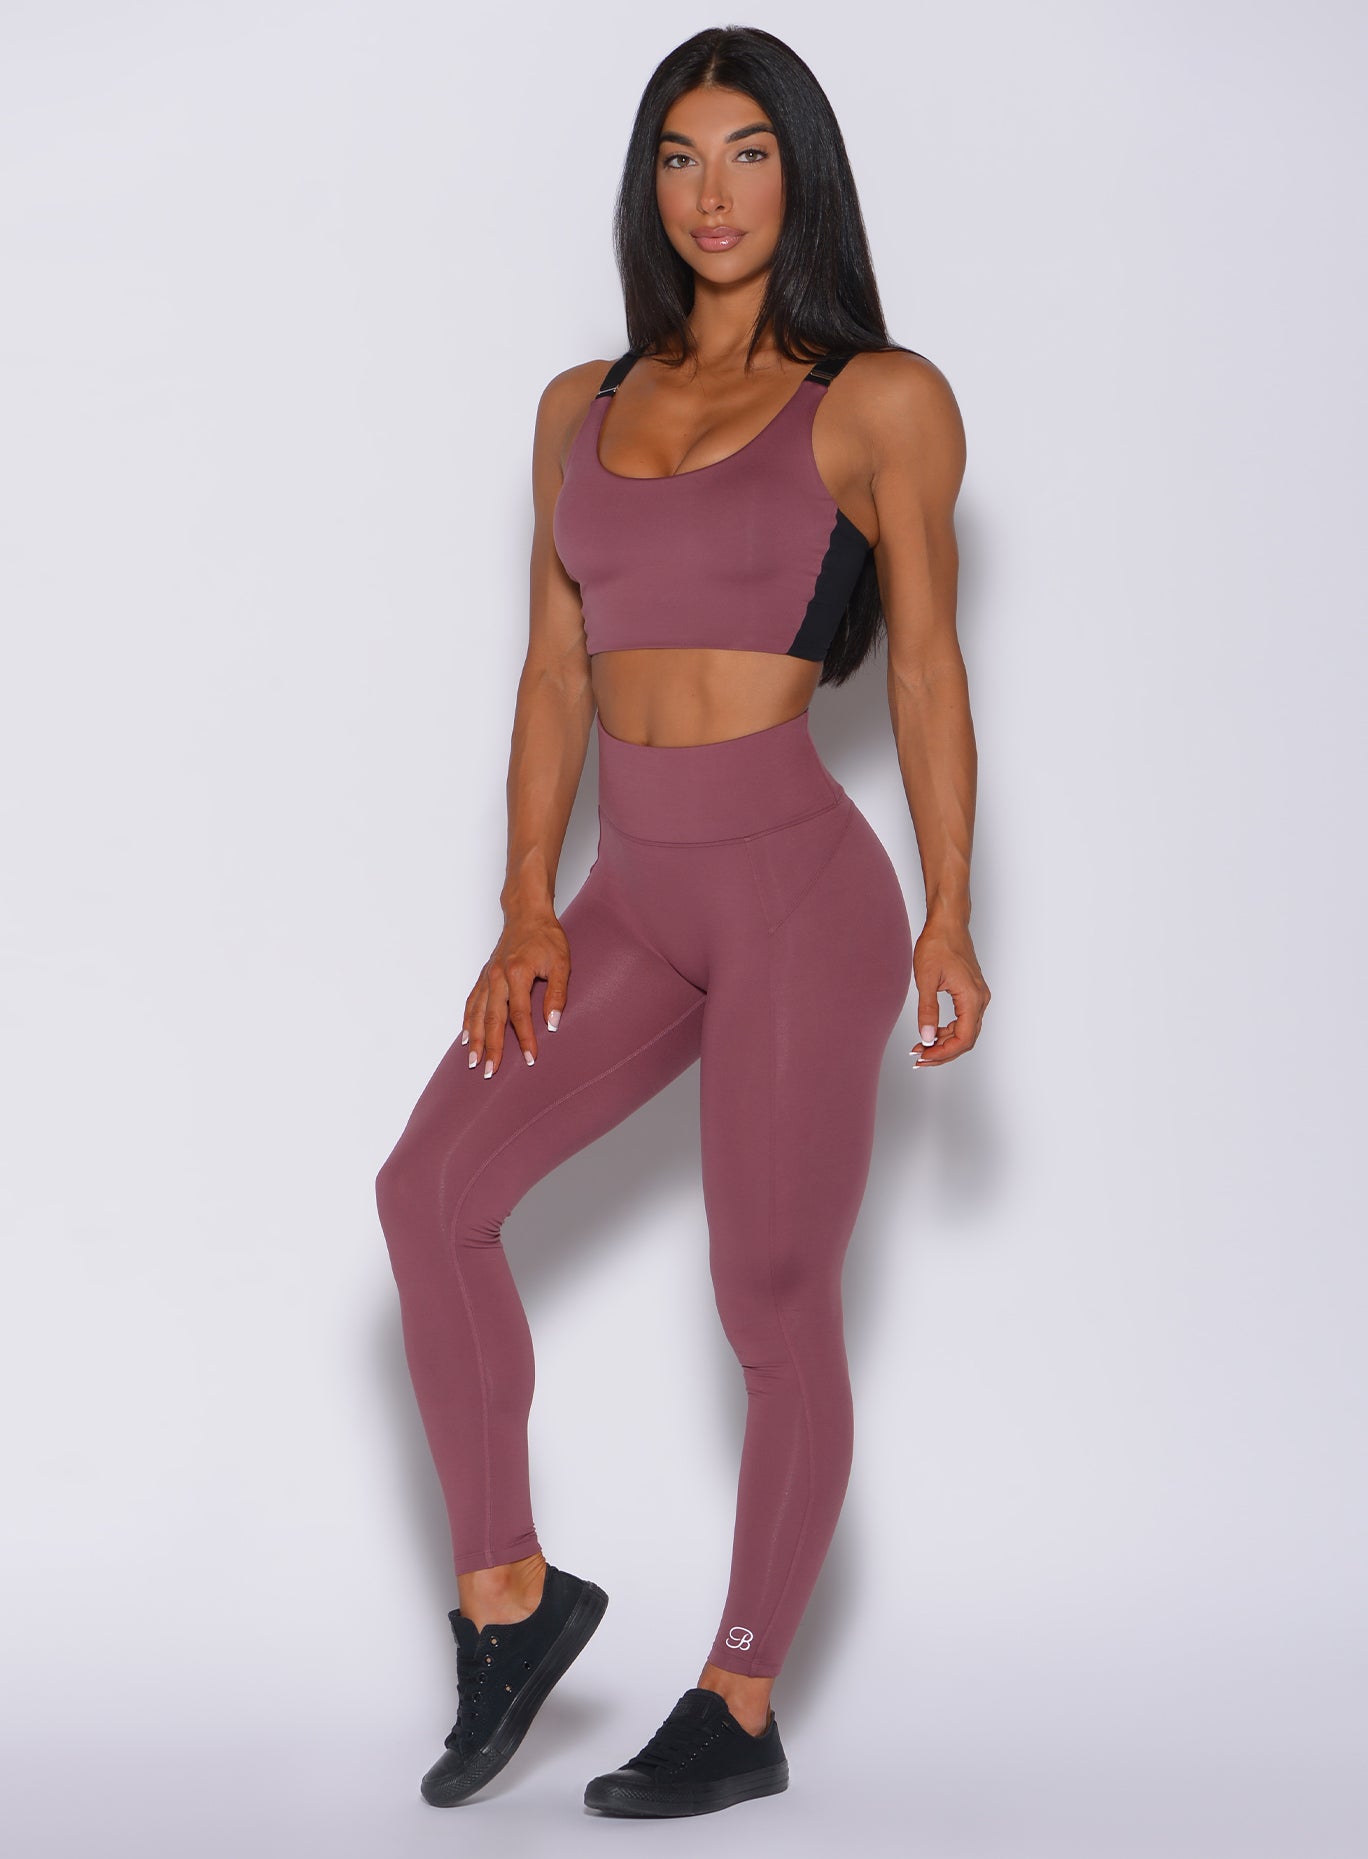 Picture of a model facing forward wearing our snatched waist leggings in merlot color and a matching bra